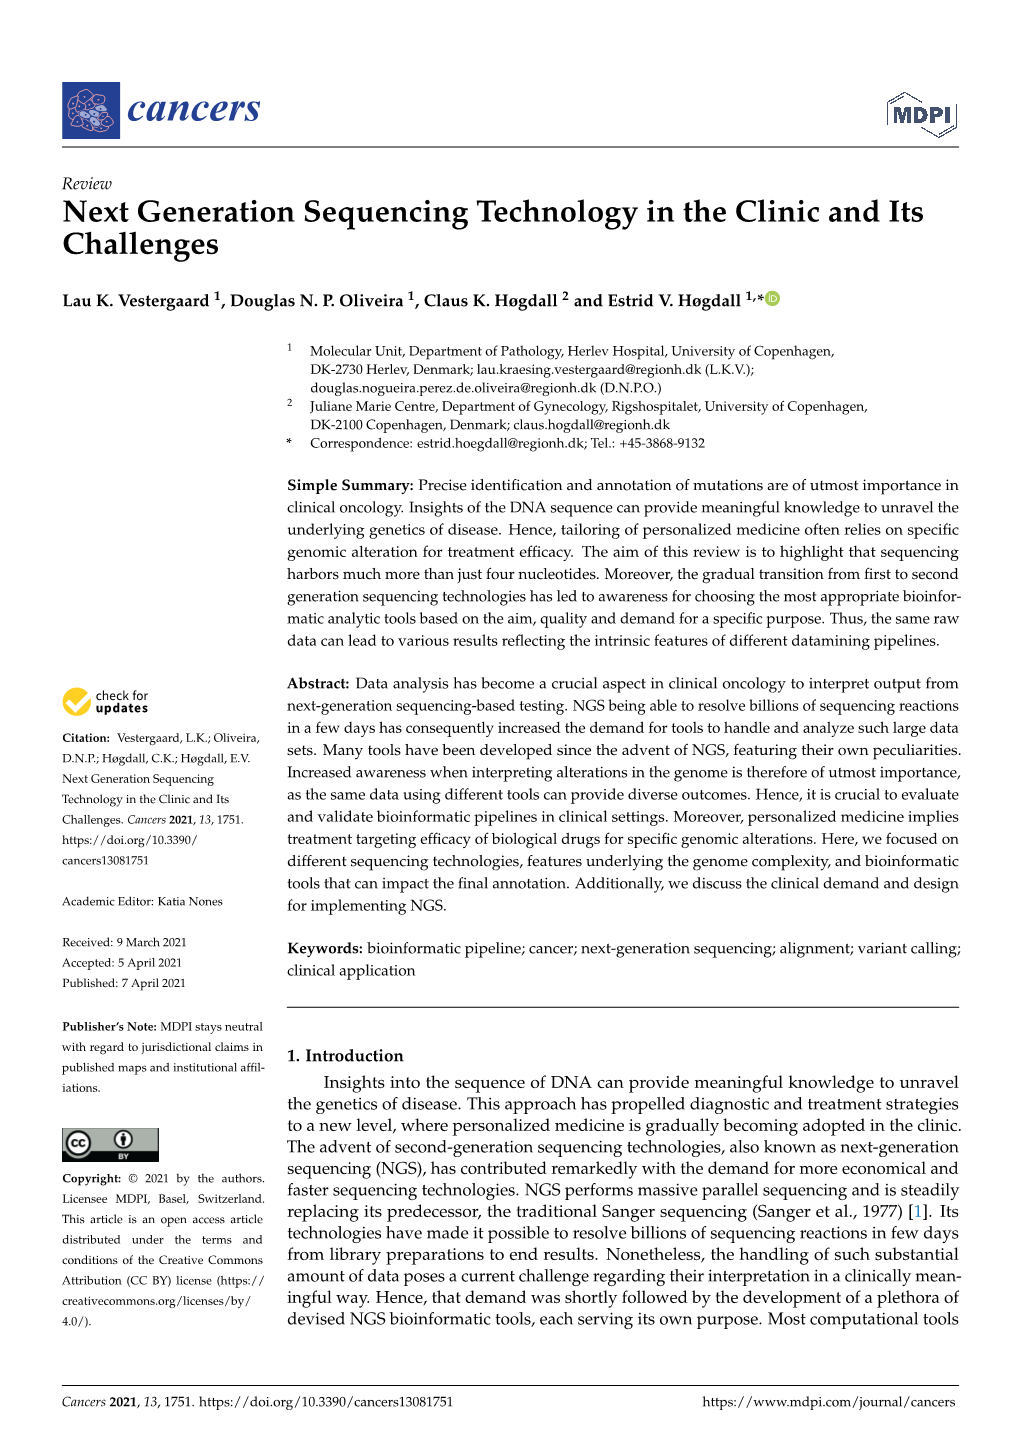 Next Generation Sequencing Technology in the Clinic and Its Challenges